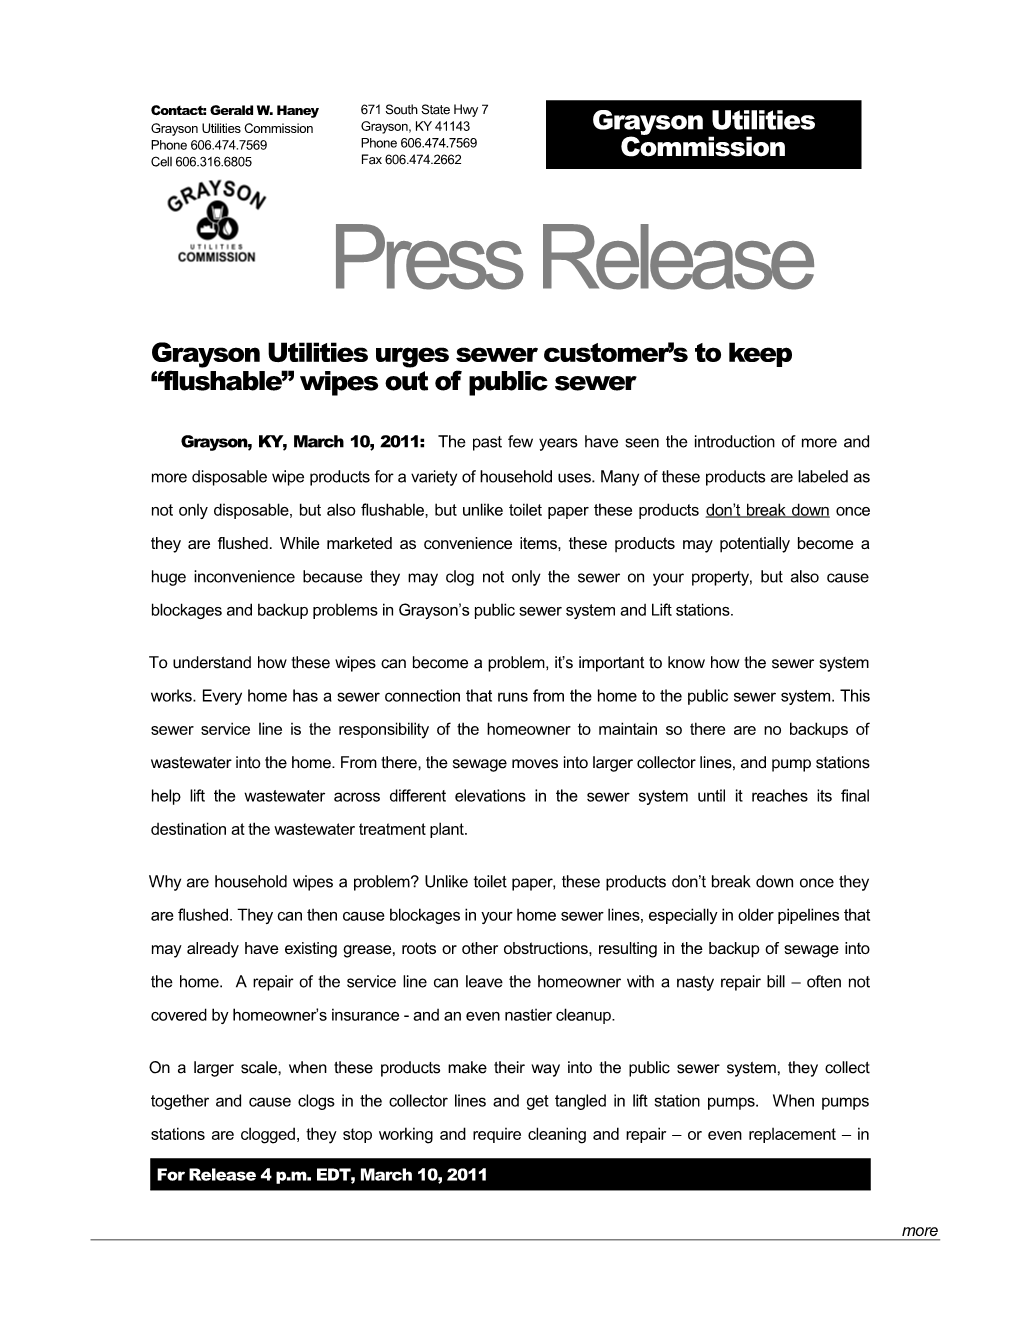 Grayson Utilities Urges Sewer Customer S to Keep Flushable Wipes out of Public Sewer